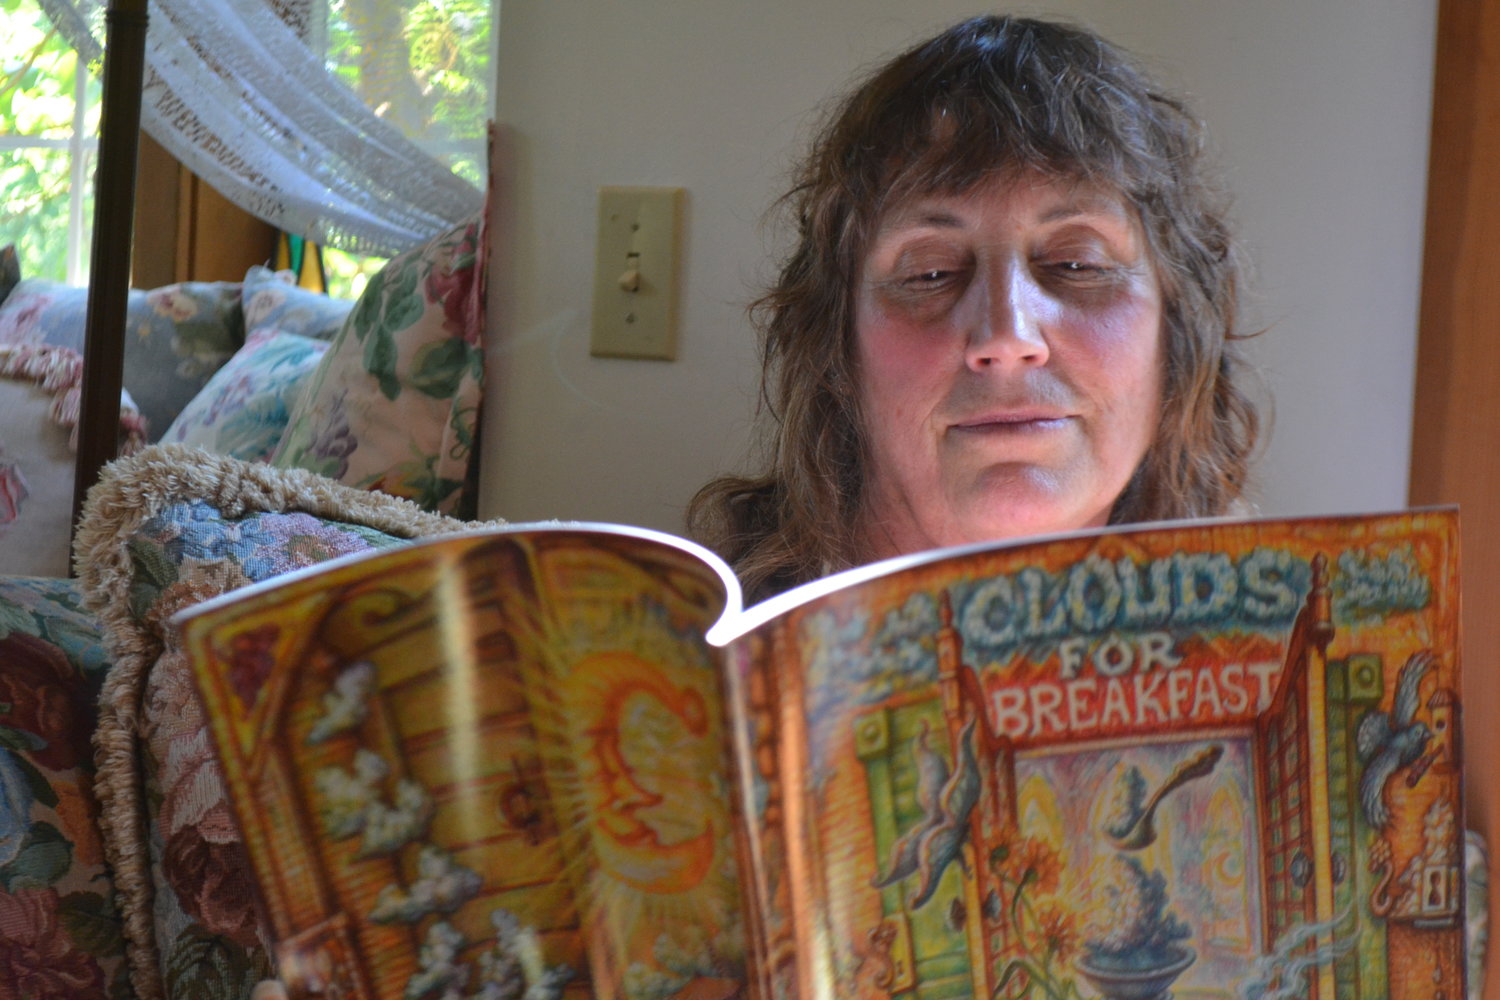 Laura Eisen reads through her children’s book “Clouds For Breakfast,” which was named a 2014 Book of the Year by Creative Child Magazine.